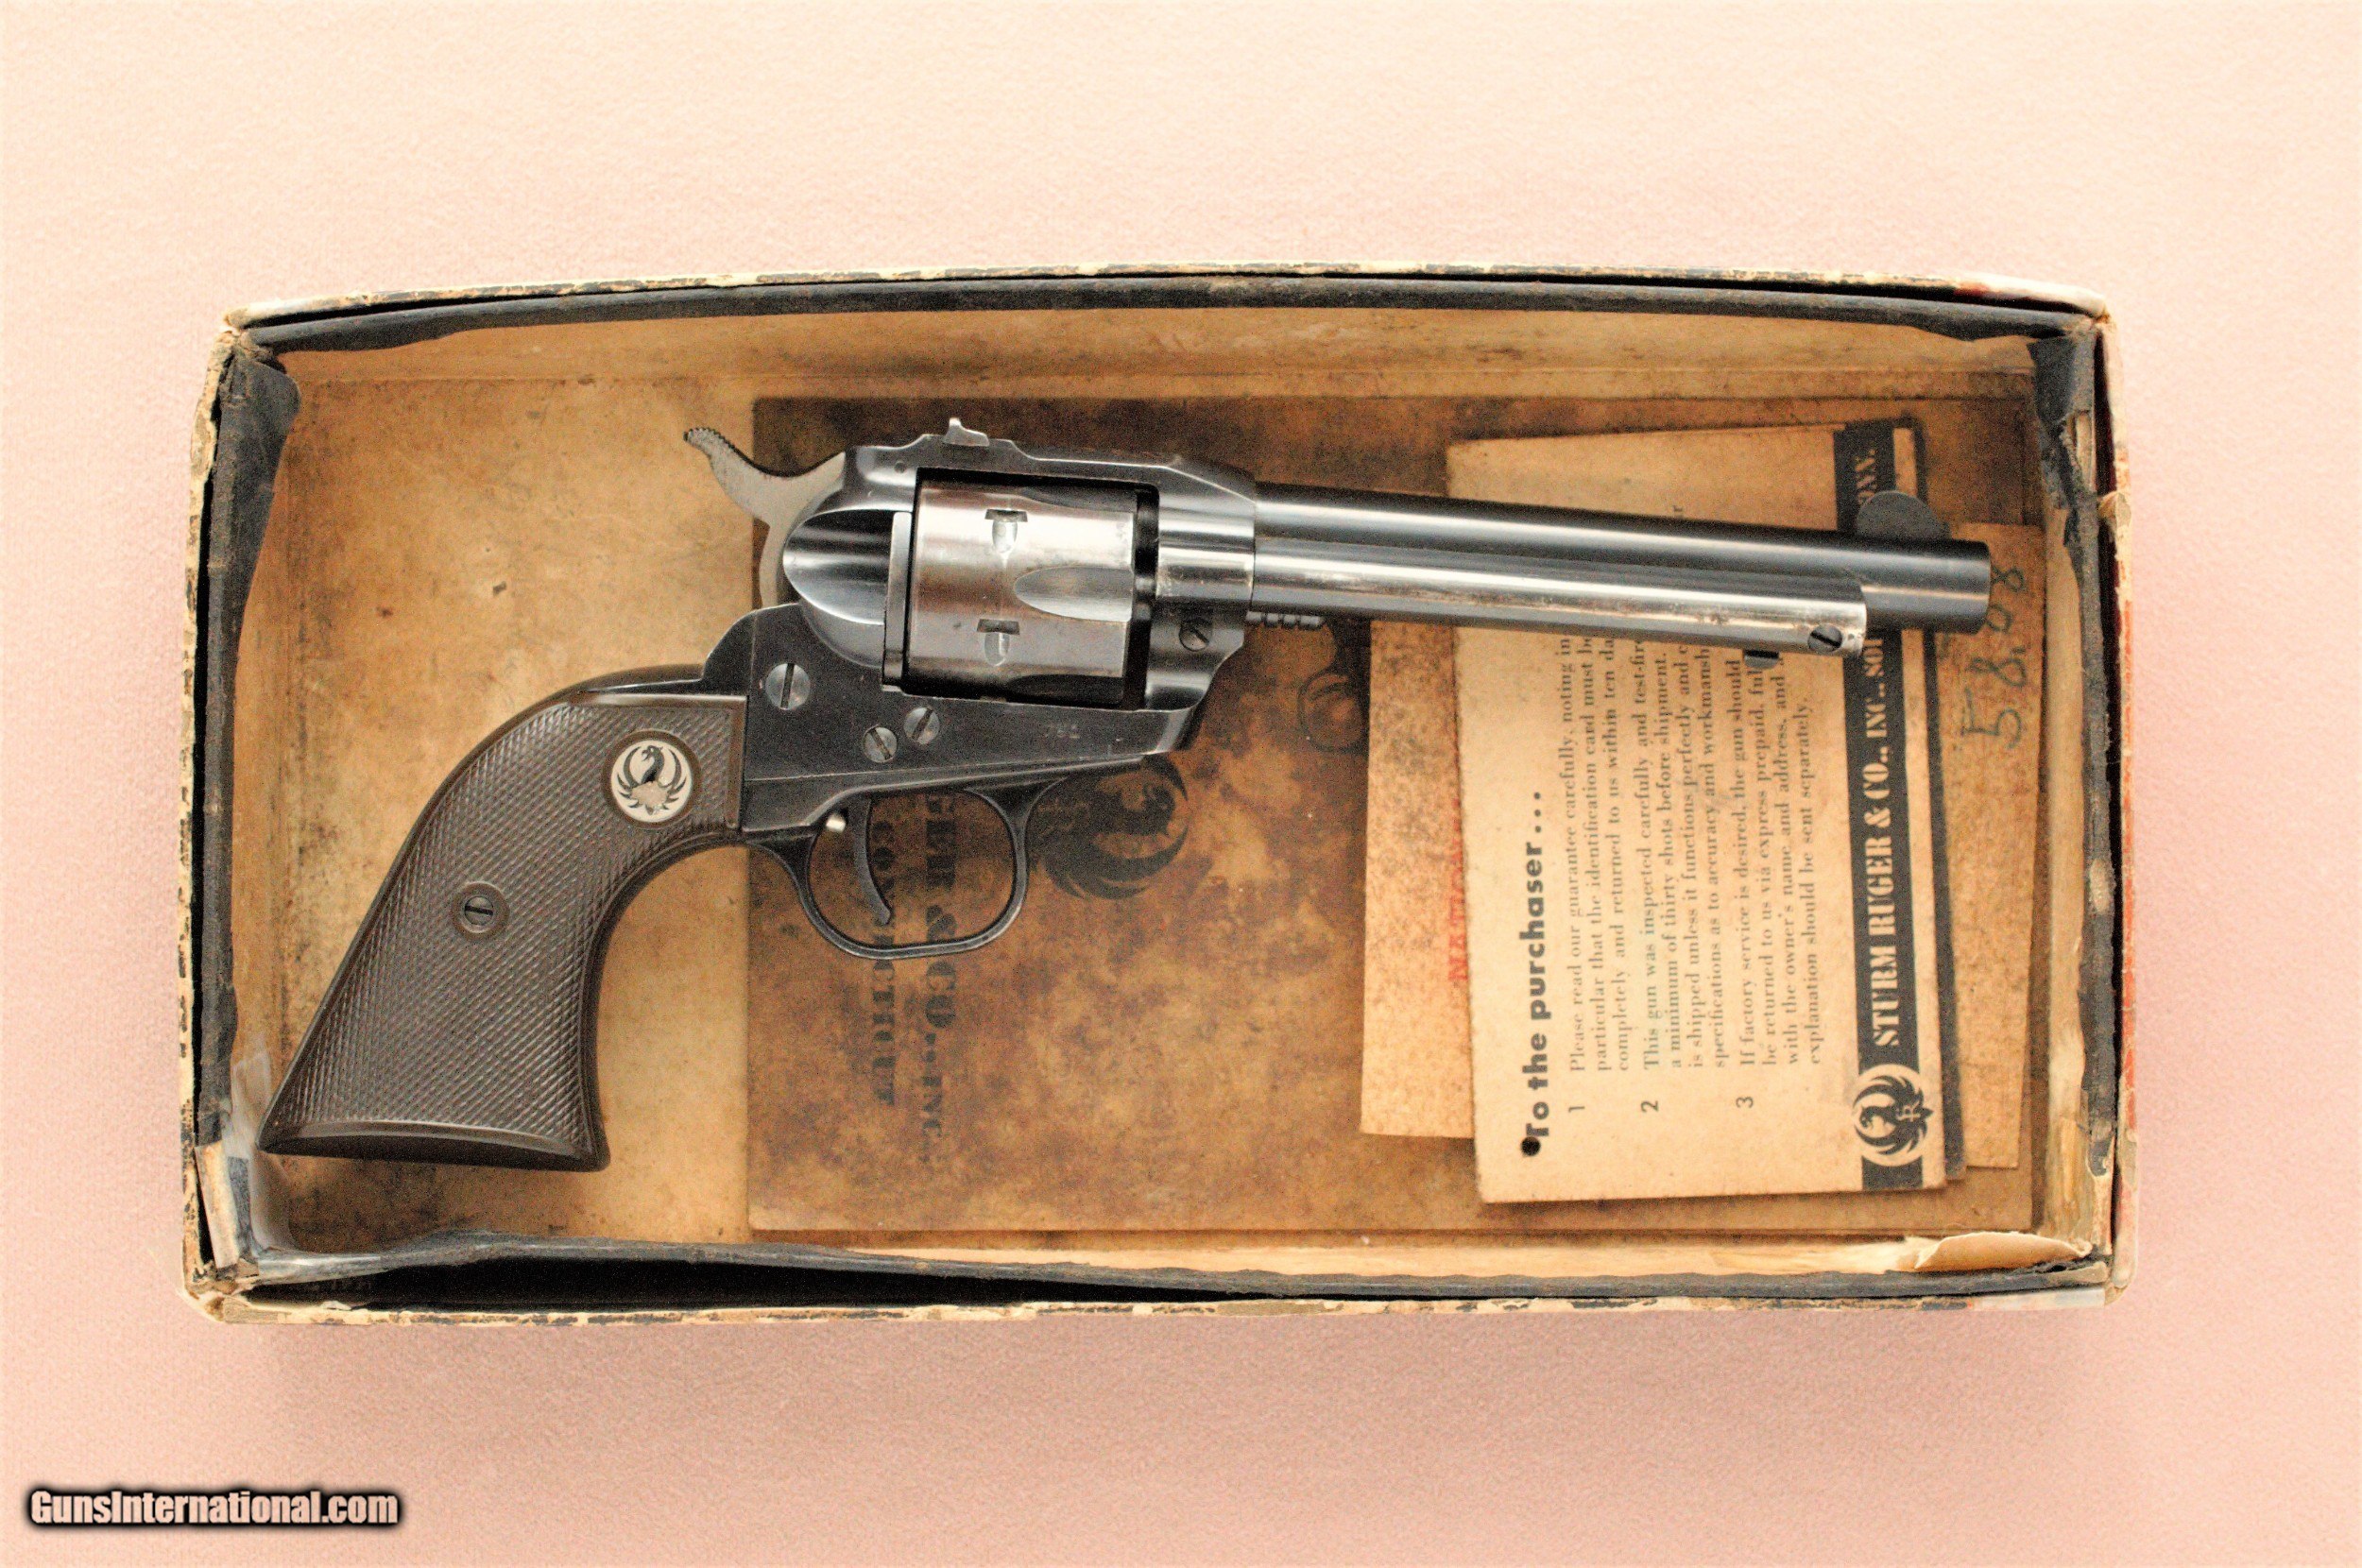 ruger single six serial number date